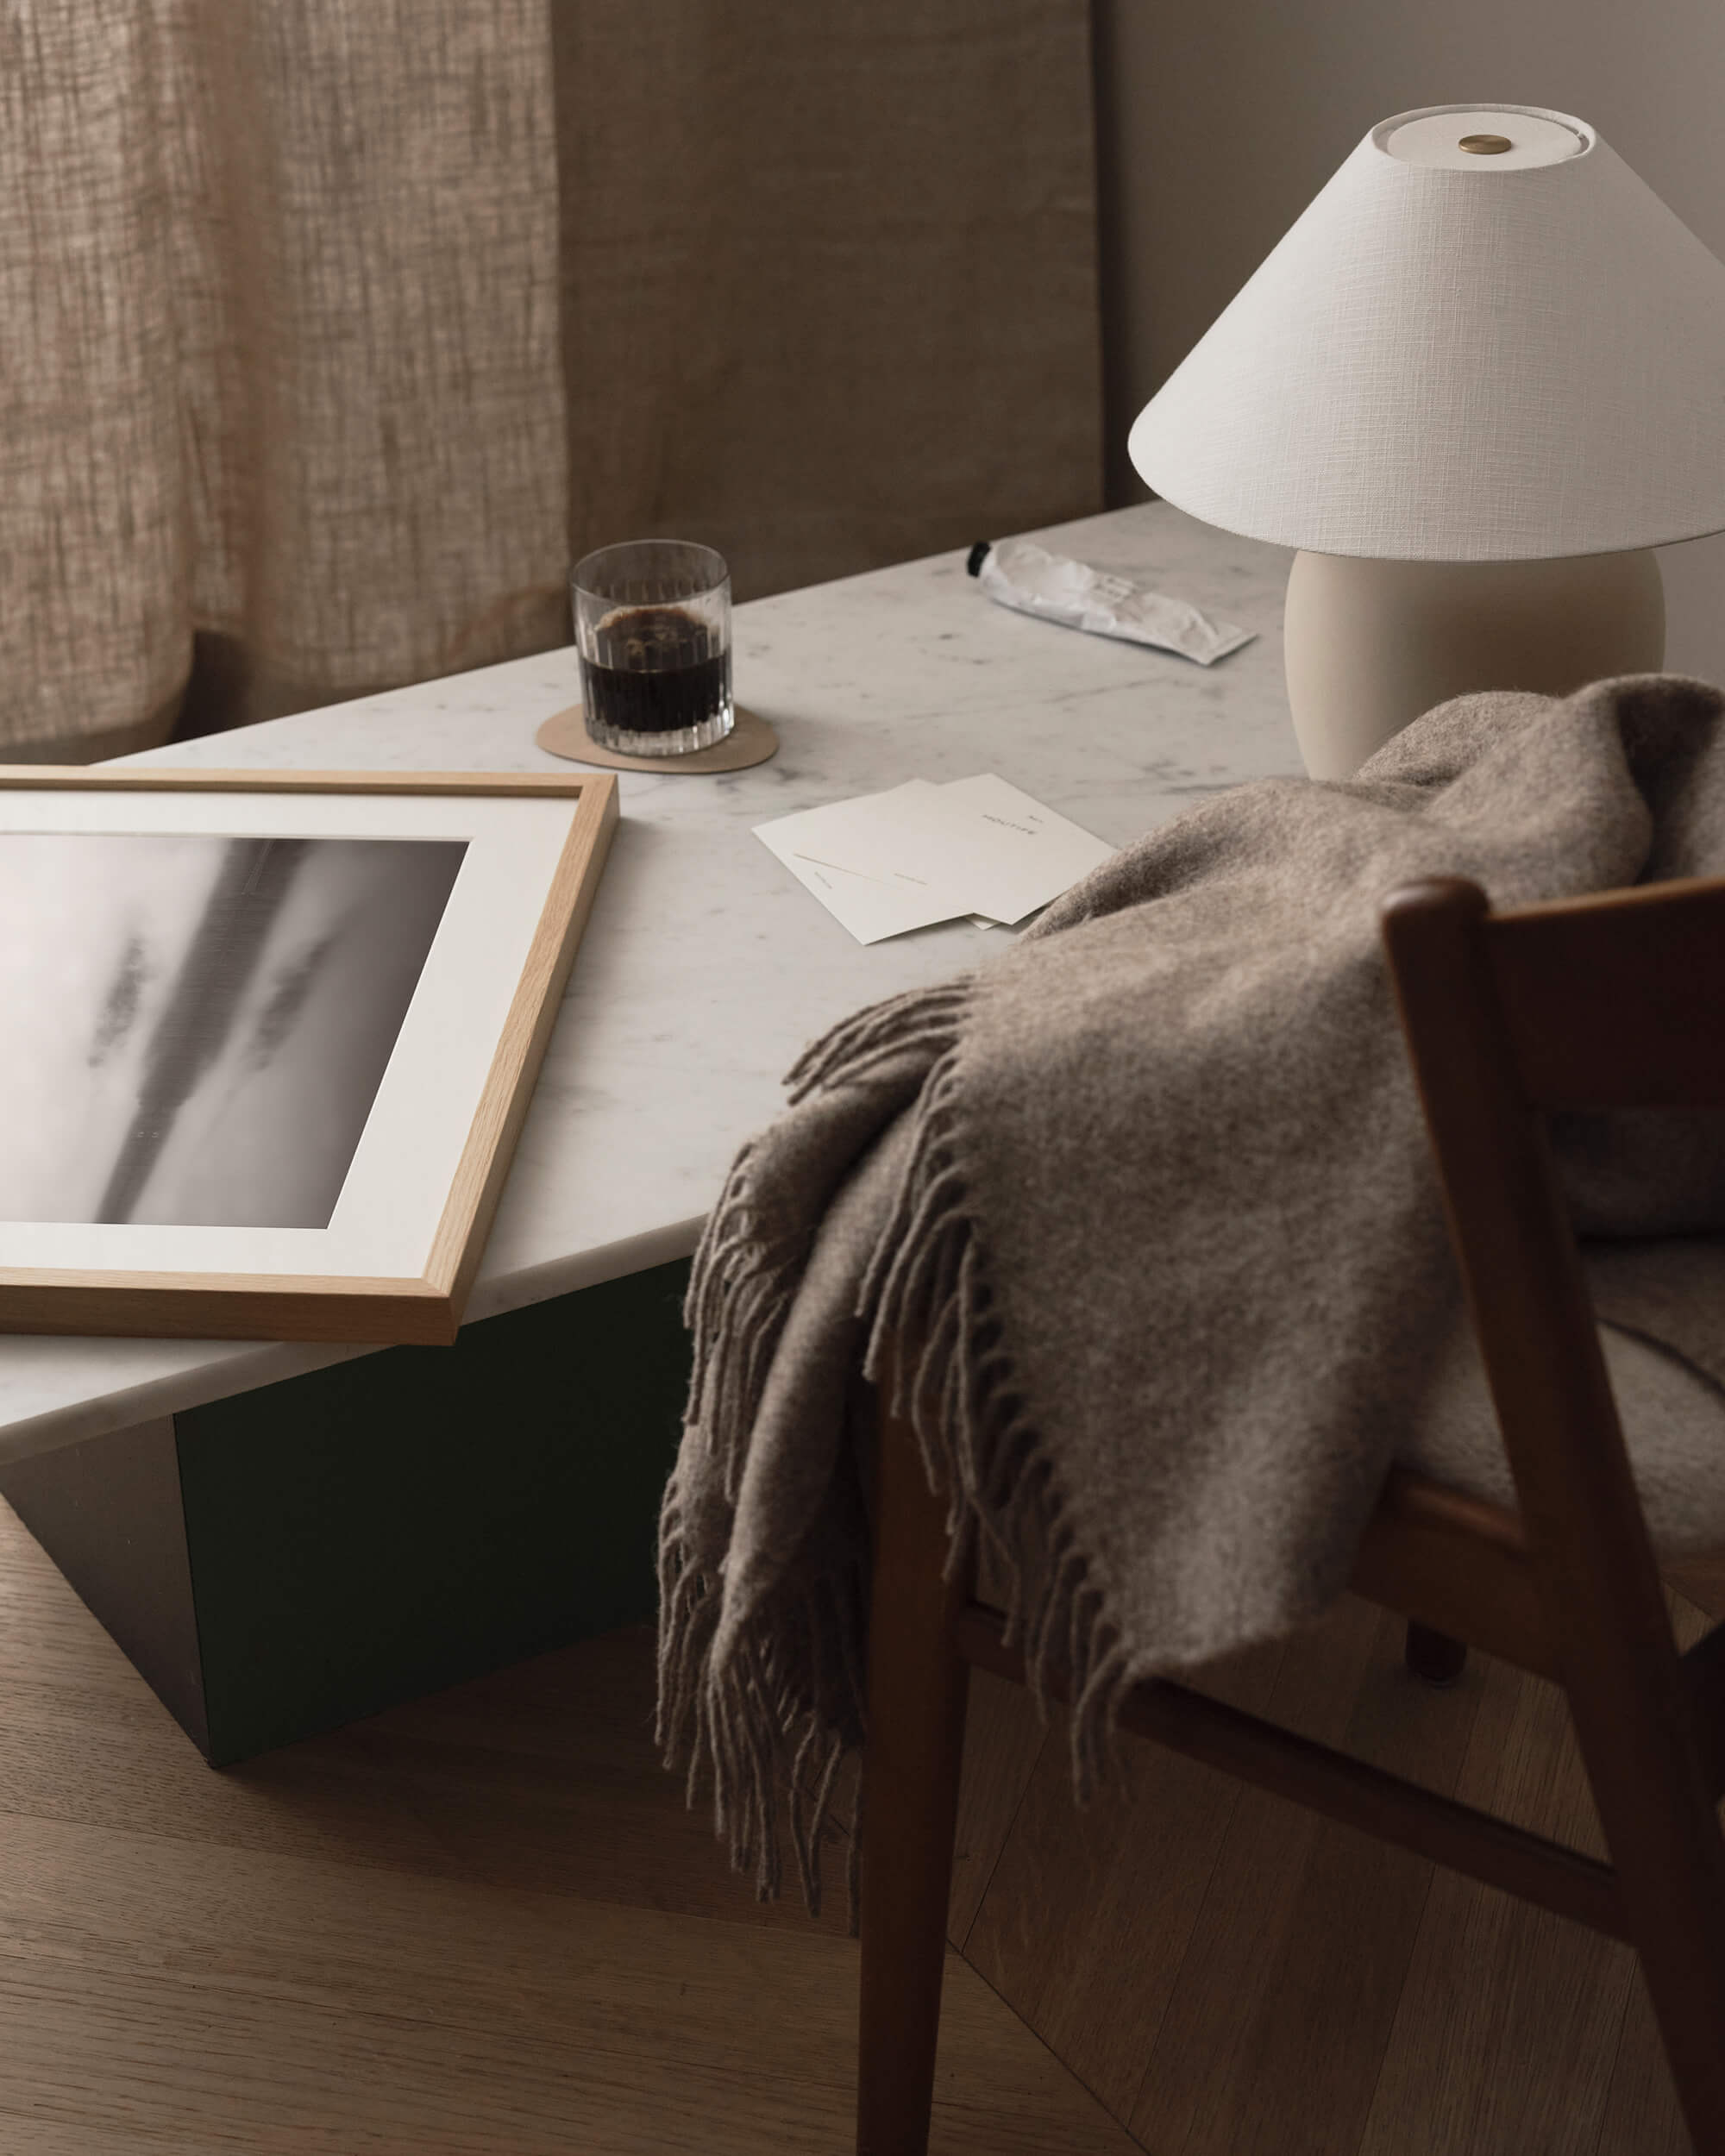 Office desk with scandinavian interior feel with black and white photo art